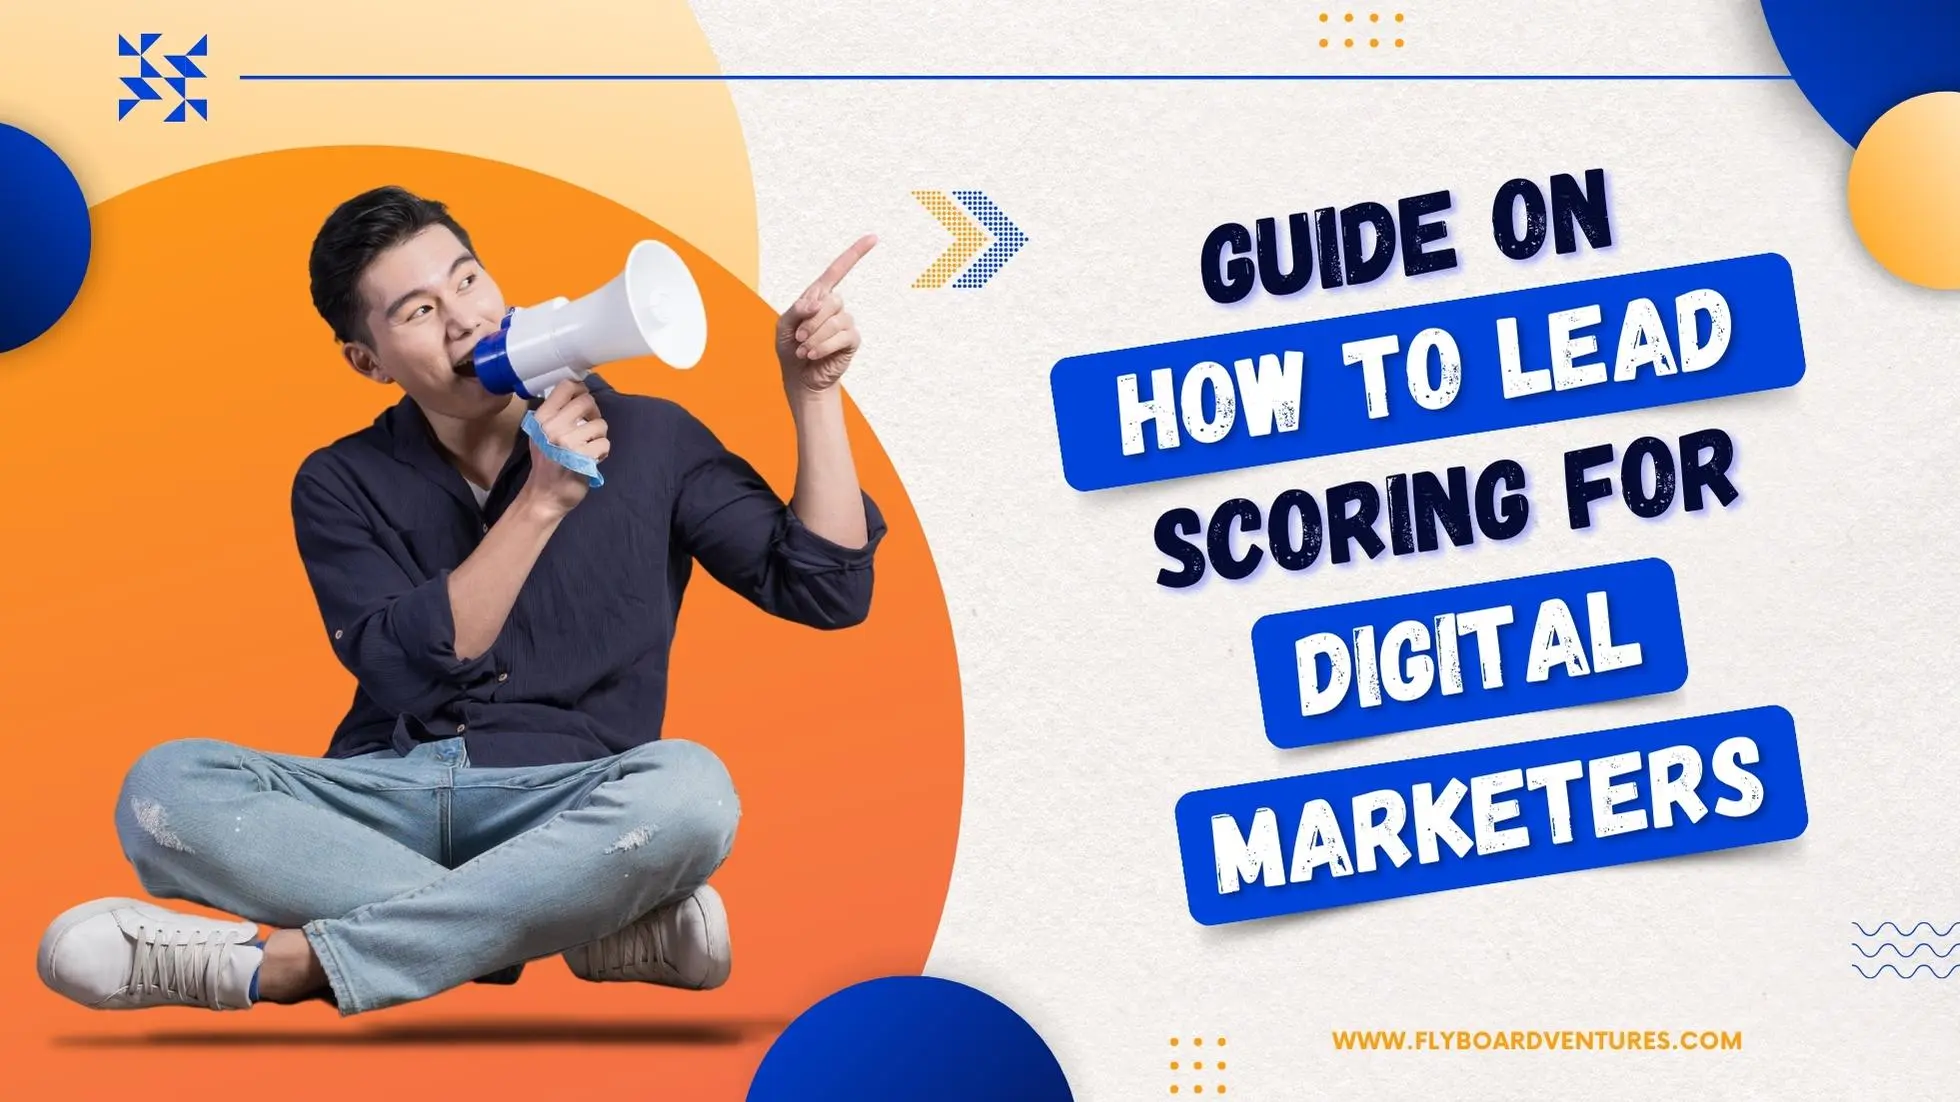 Guide On How To Lead Scoring For Digital Marketers